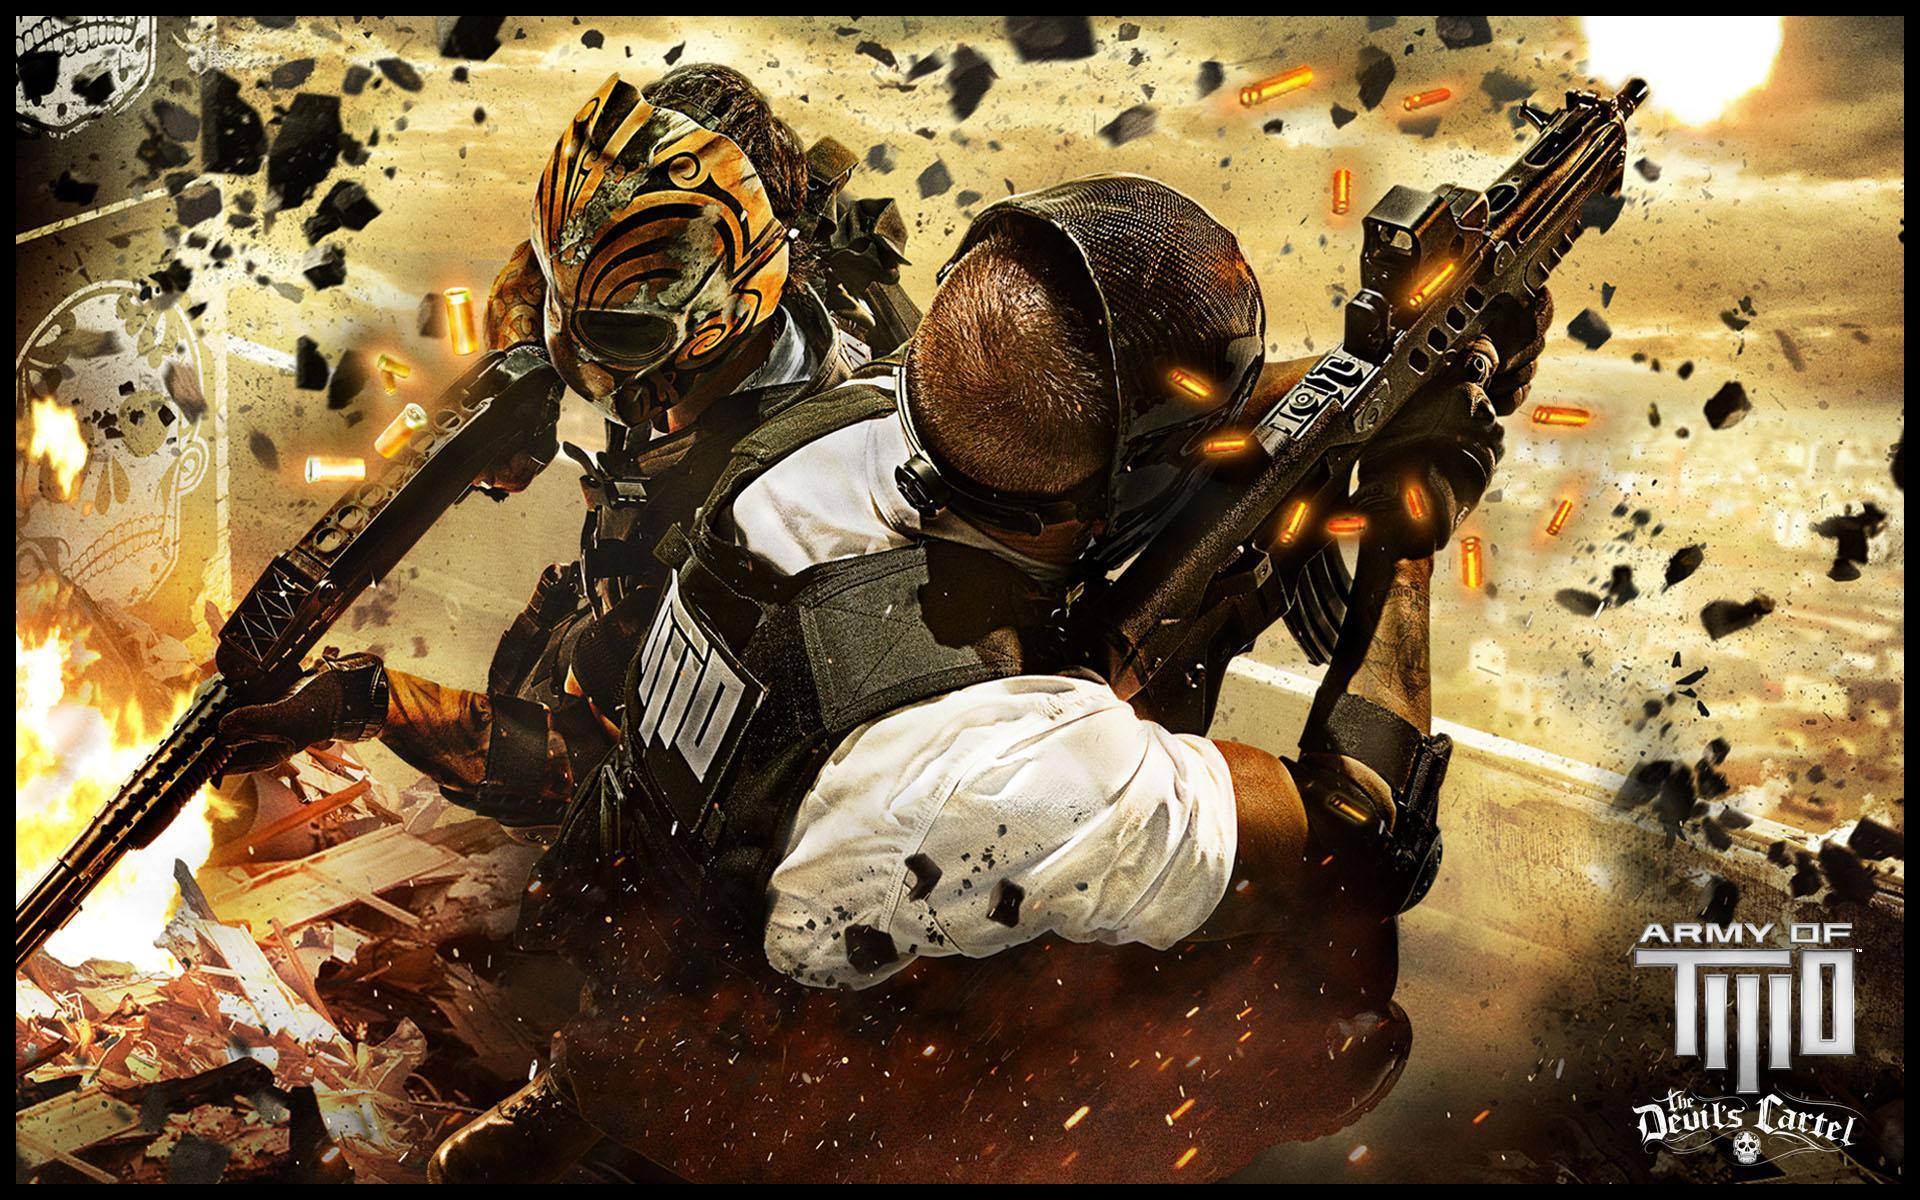 Army of Two: The Devil's Cartel. Army of Two